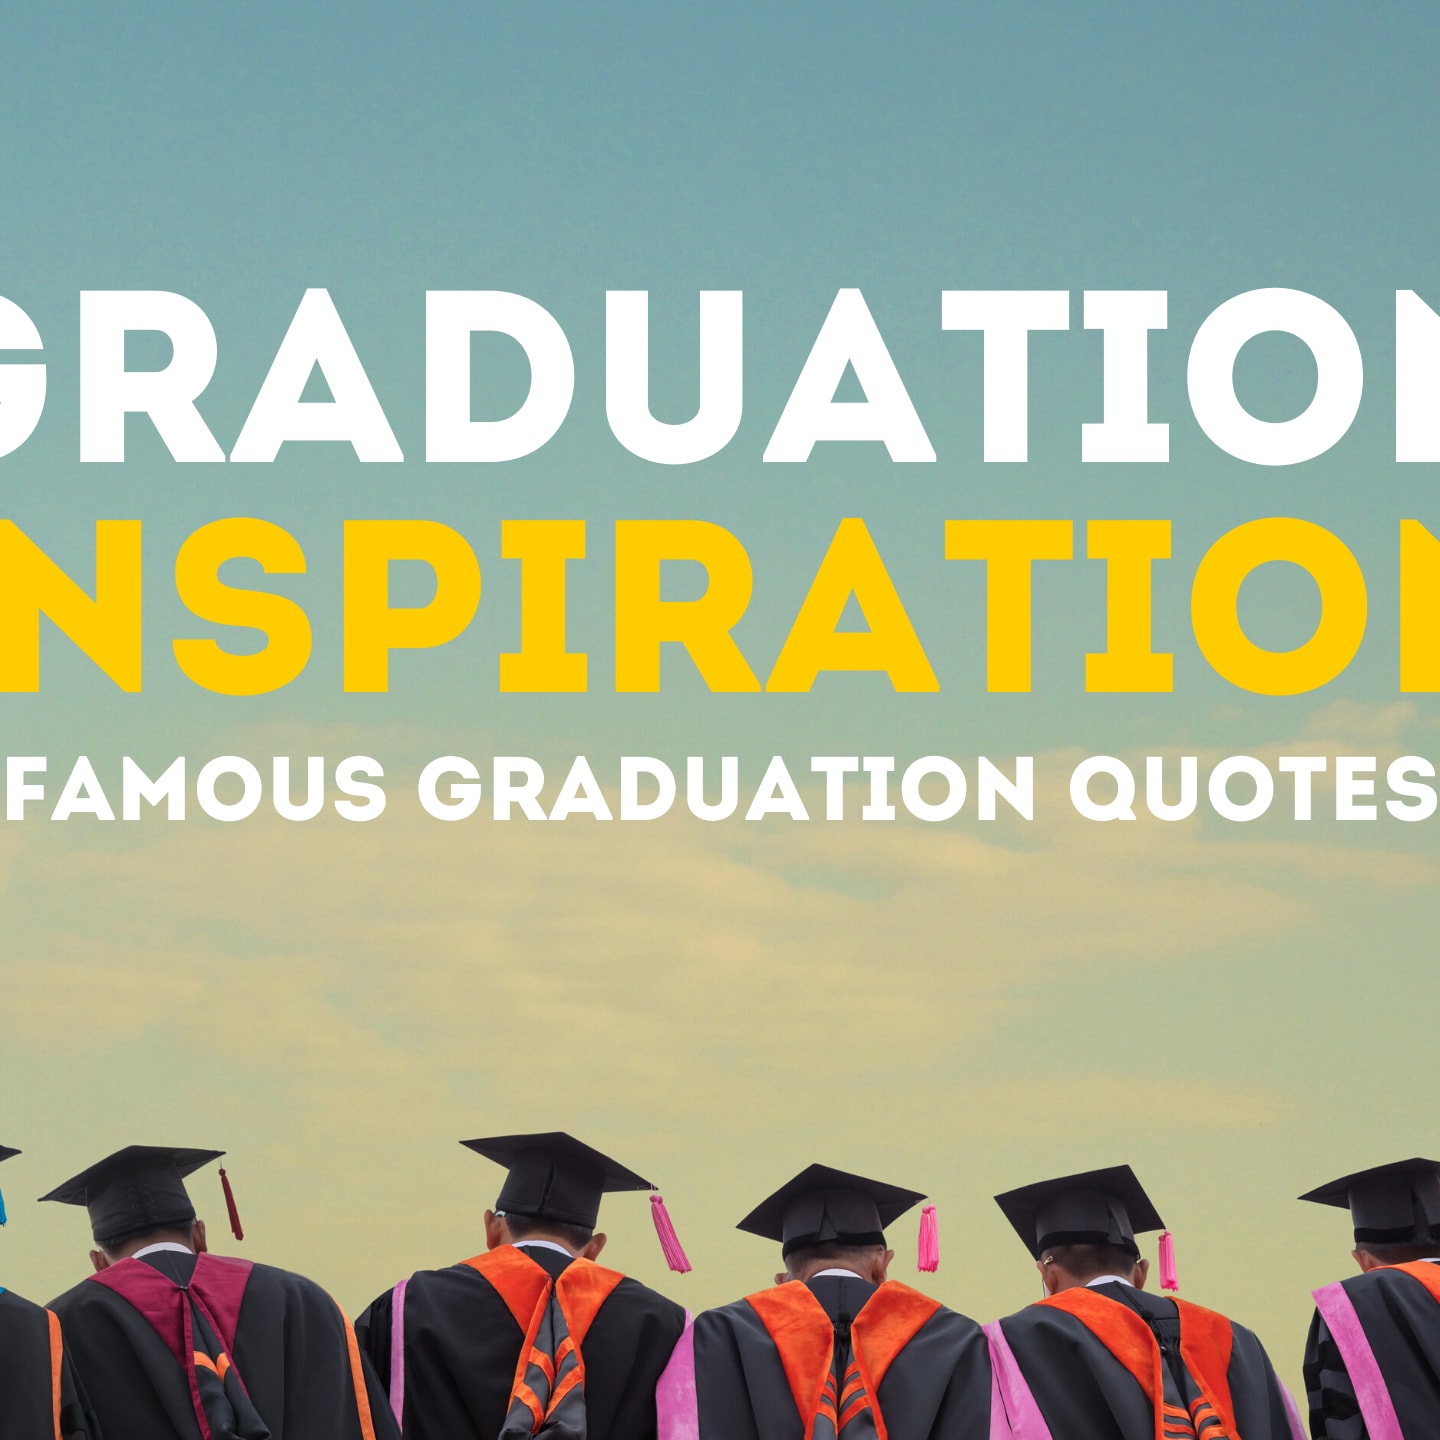 The 50 Best Graduation Quotes of All Time » 